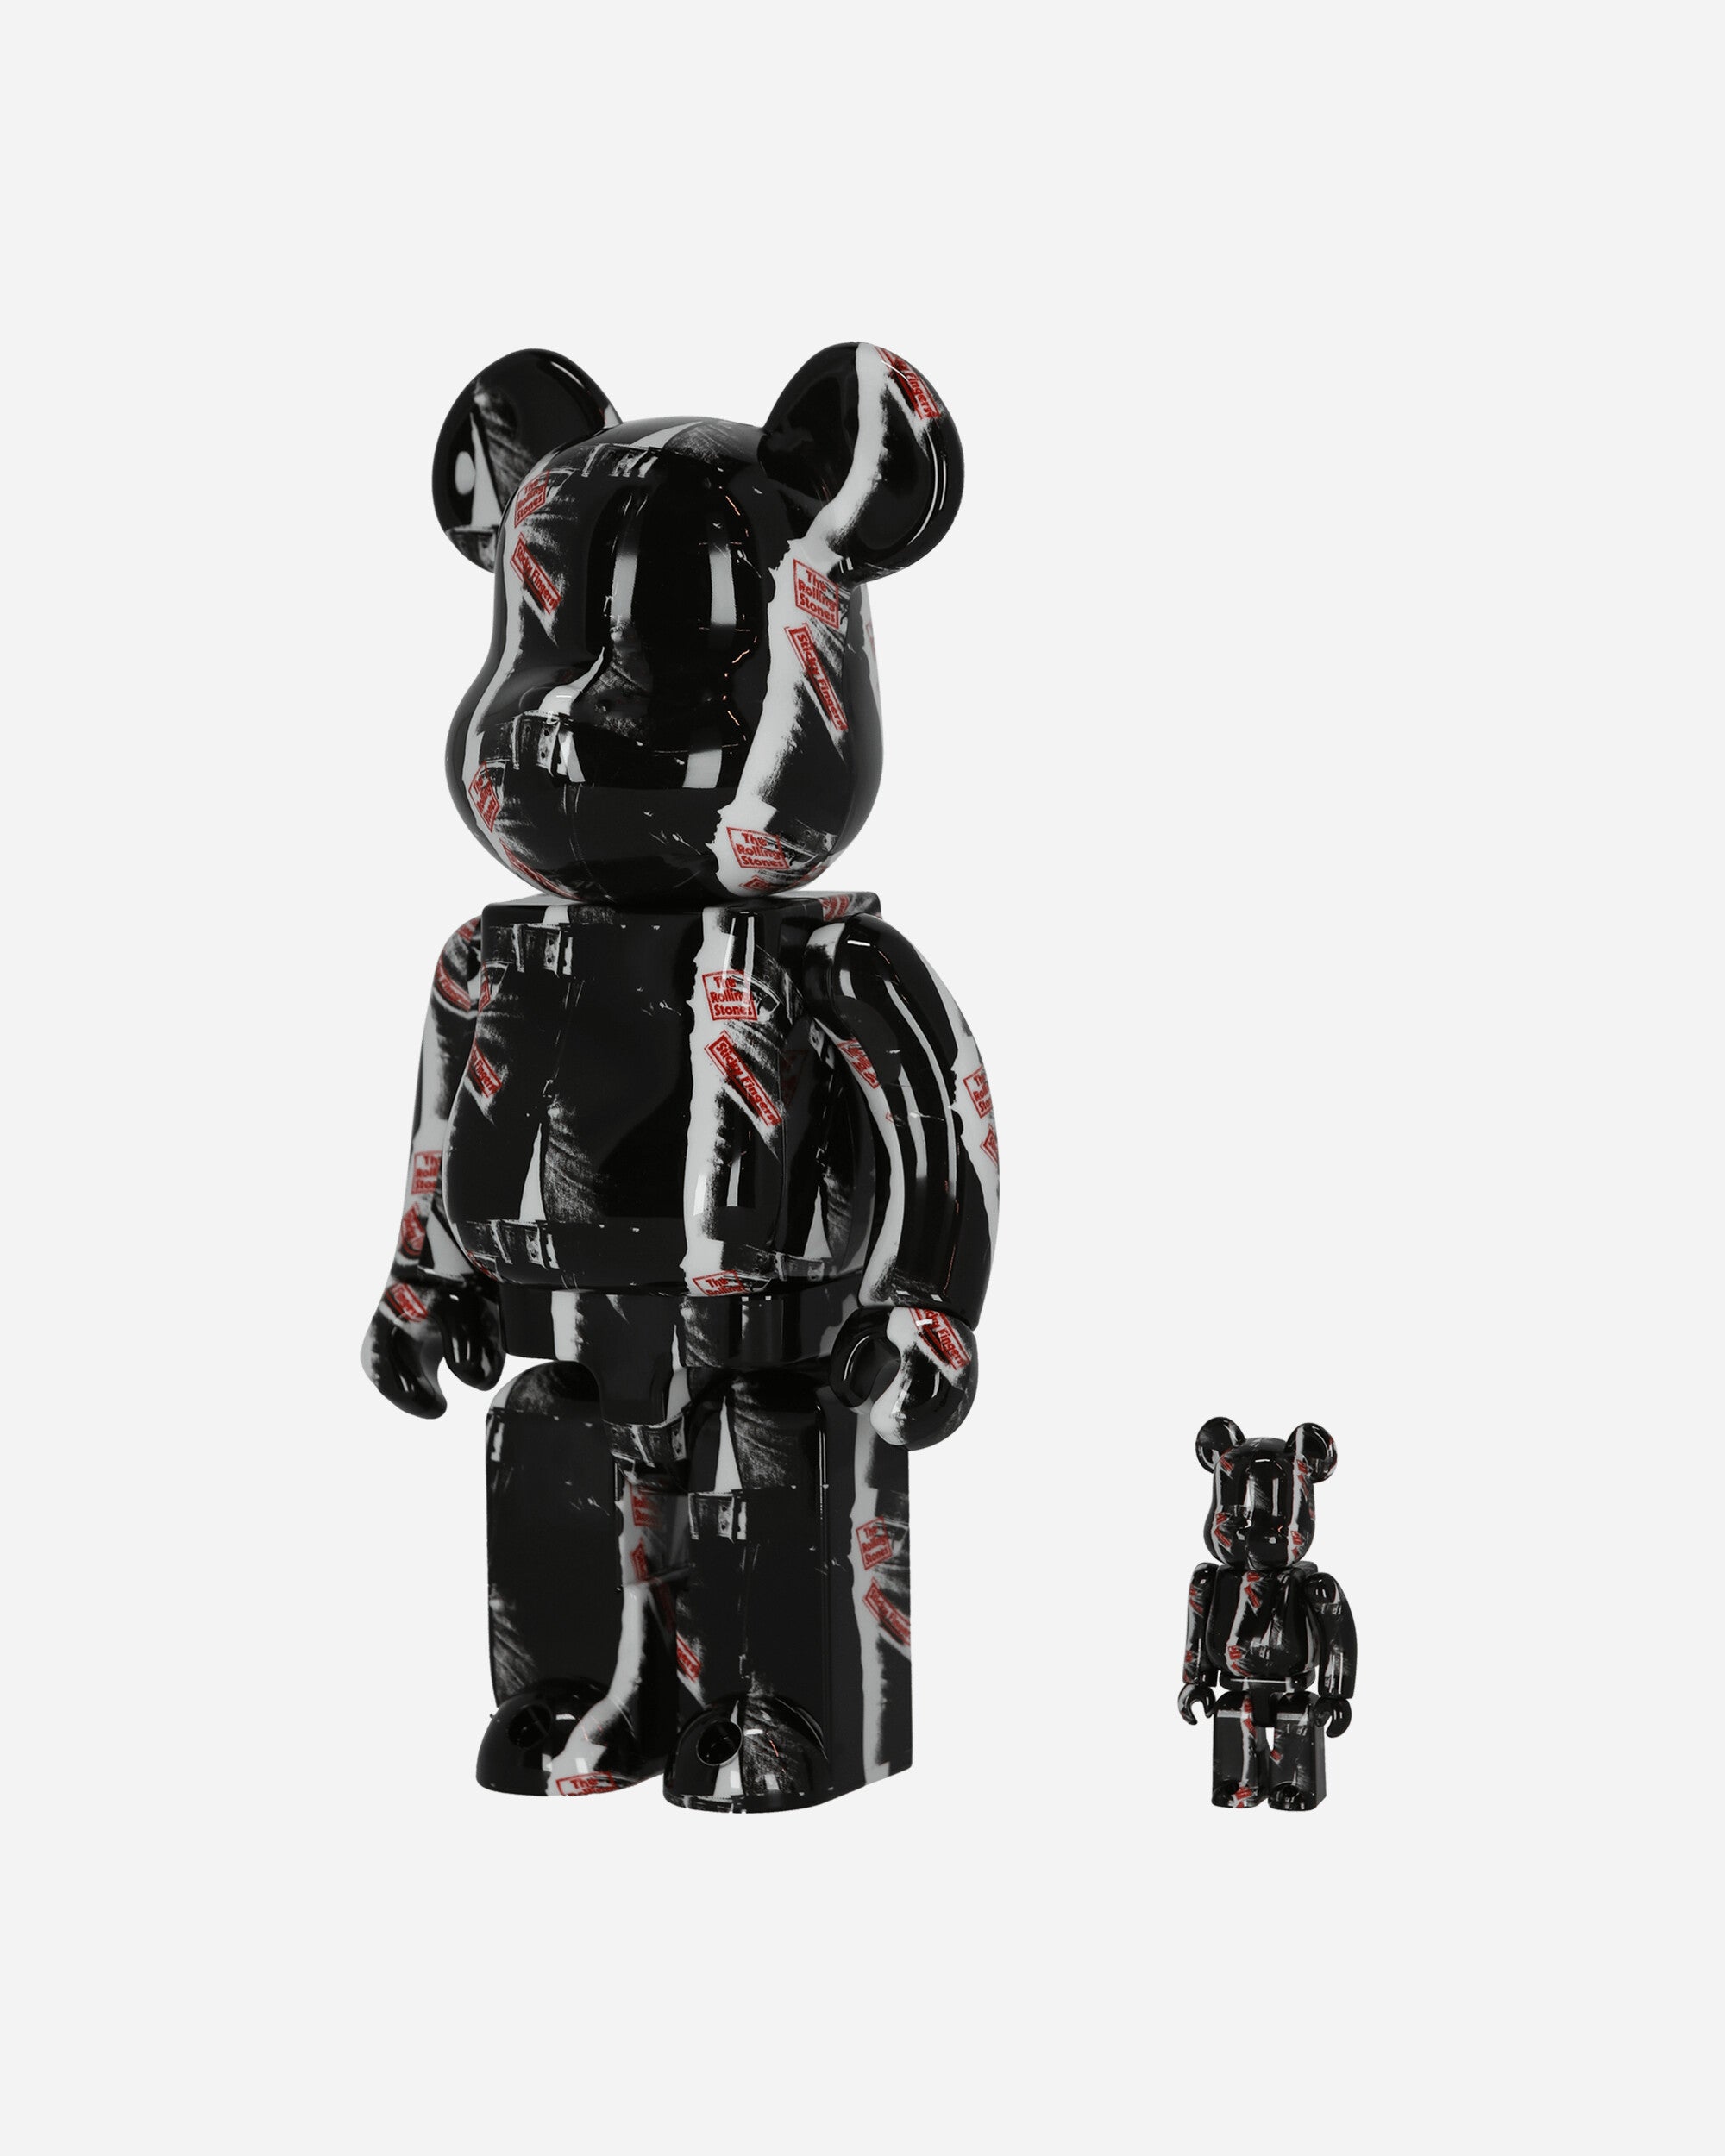 100%+400% Andy Warhol X The Rolling Stones Sticky Fingers Be@rbrick Multicolor